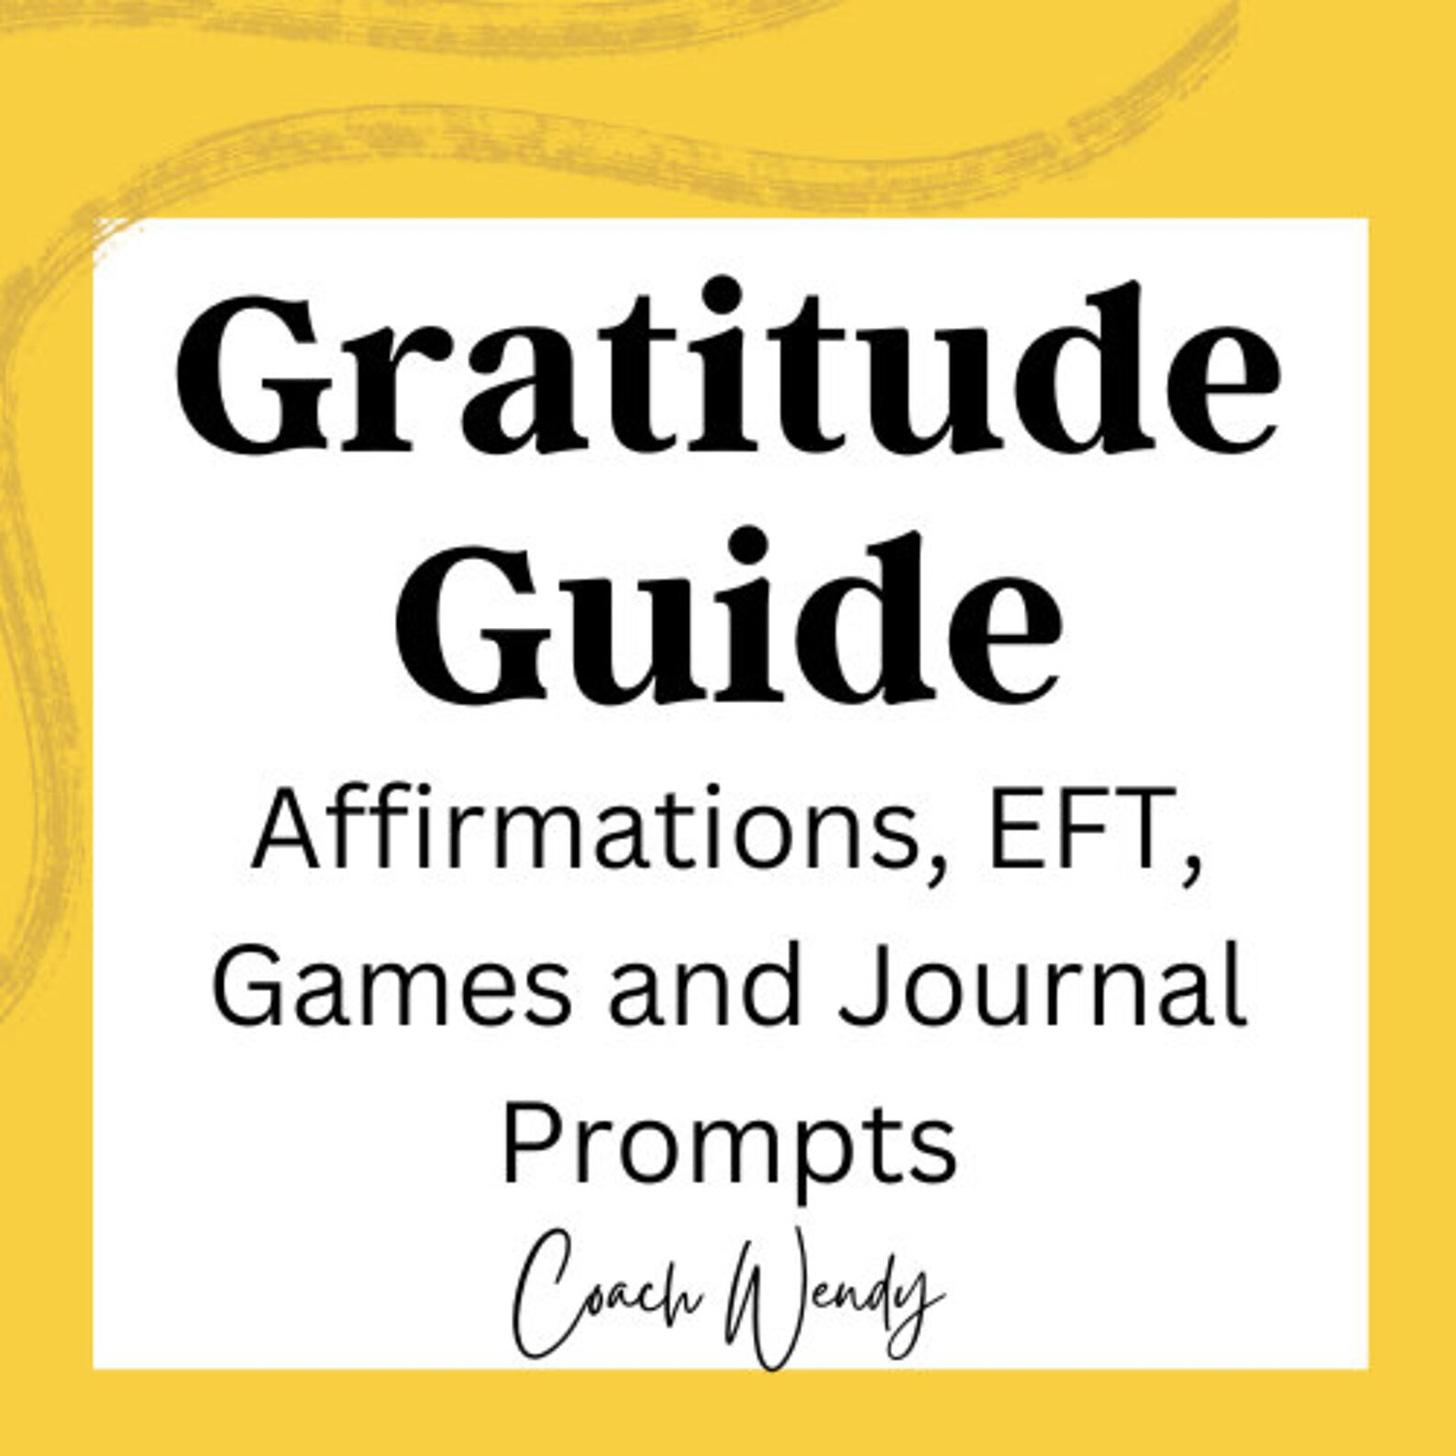 Printable Gratitude Guide from Coach Wendy.  Affirmations, EFT, games and journal prompts.